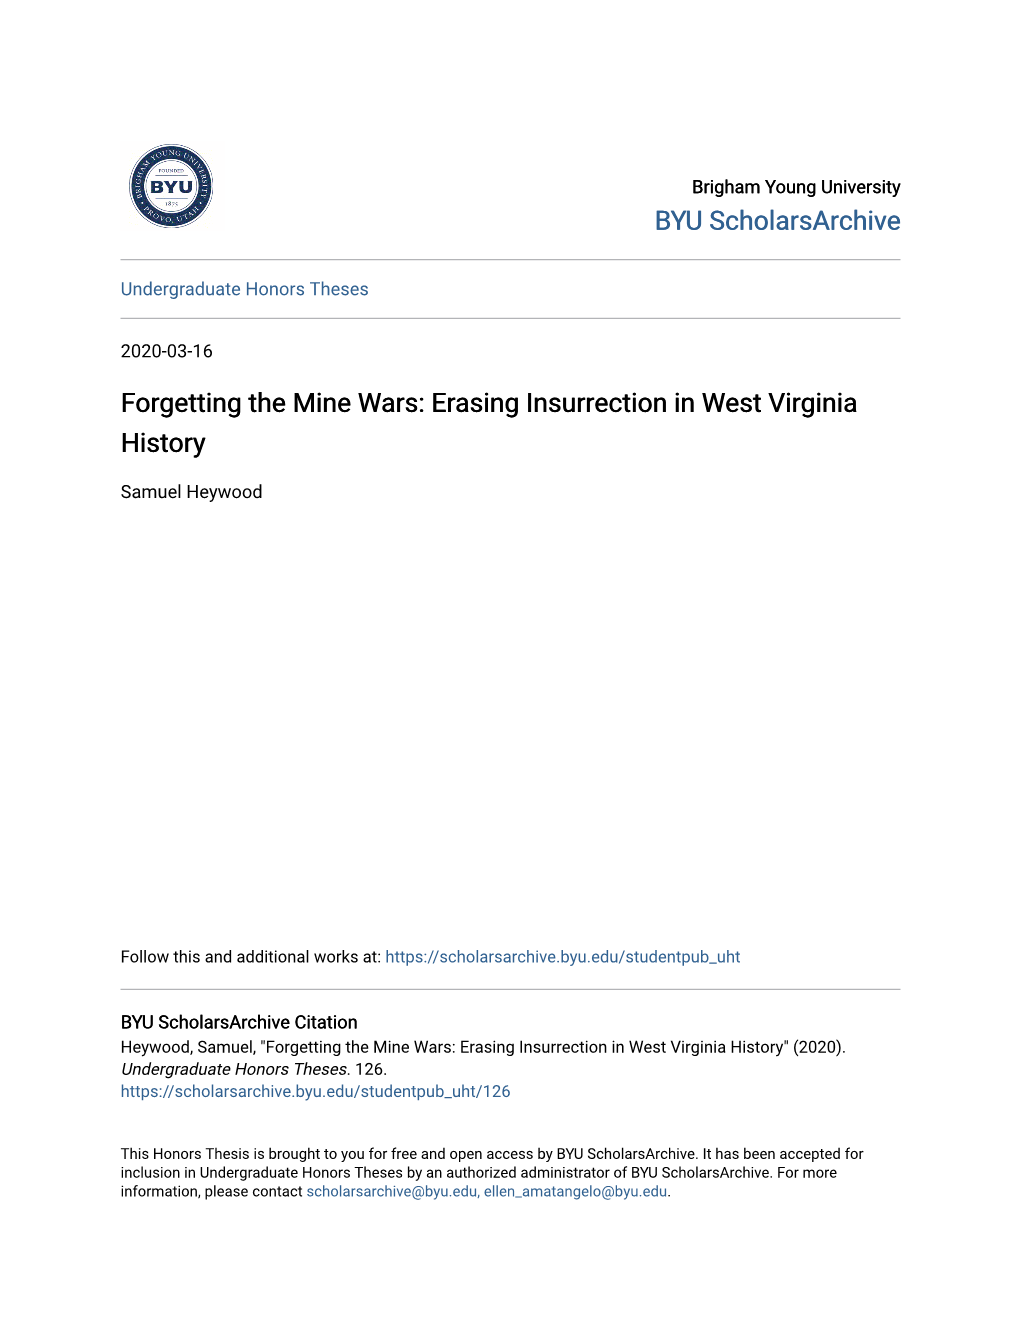 Forgetting the Mine Wars: Erasing Insurrection in West Virginia History